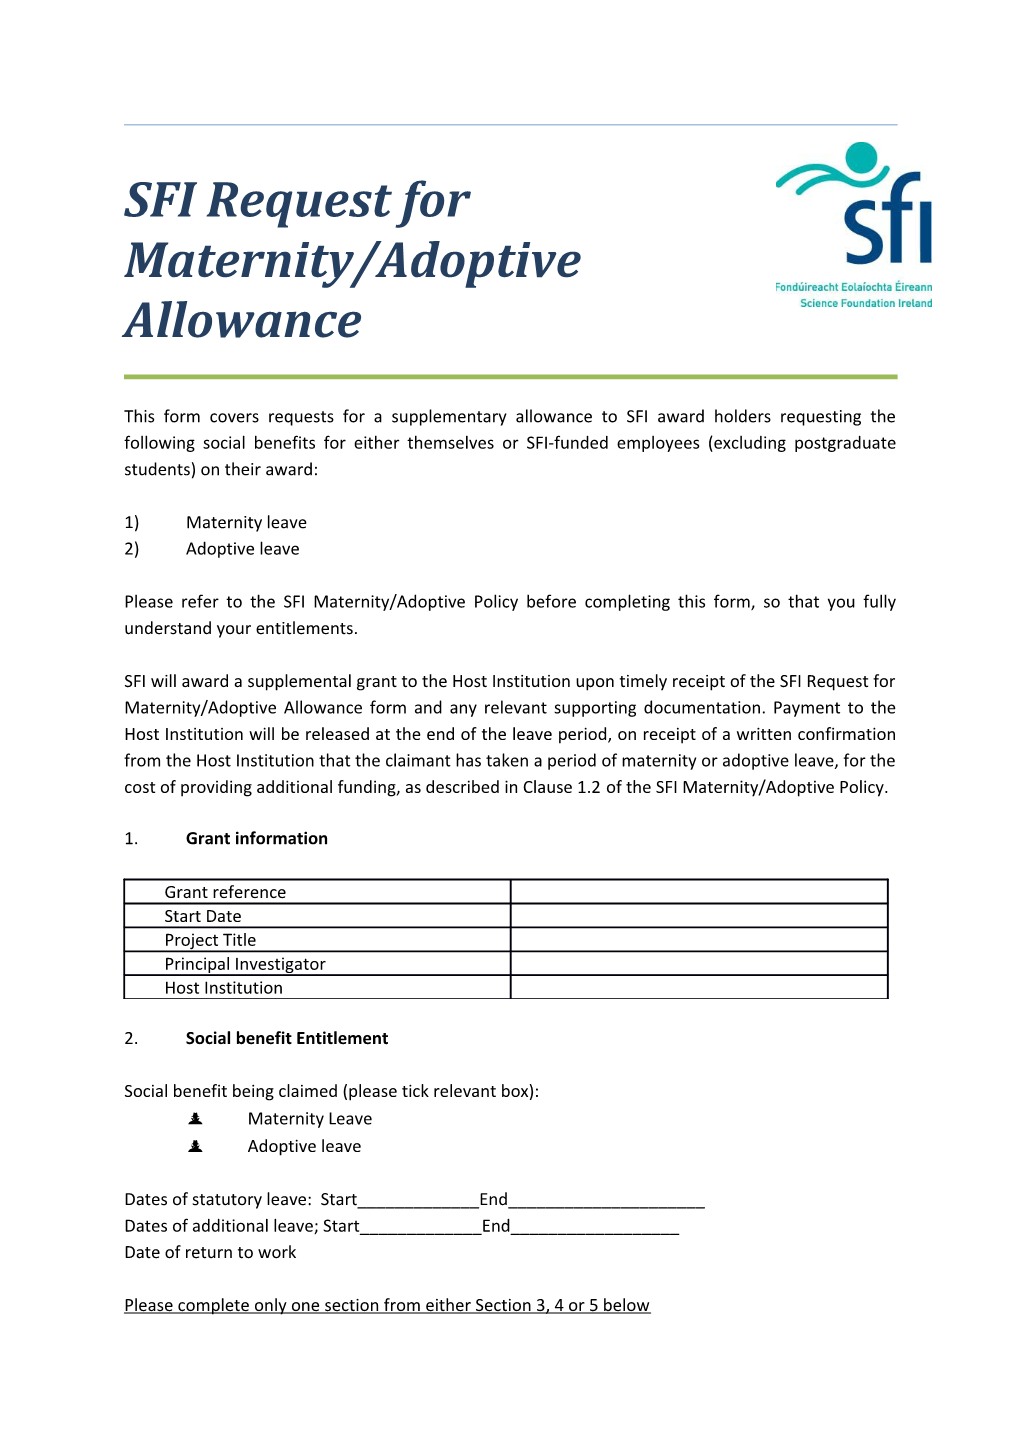 SFI Request for Maternity/Adoptive Allowance